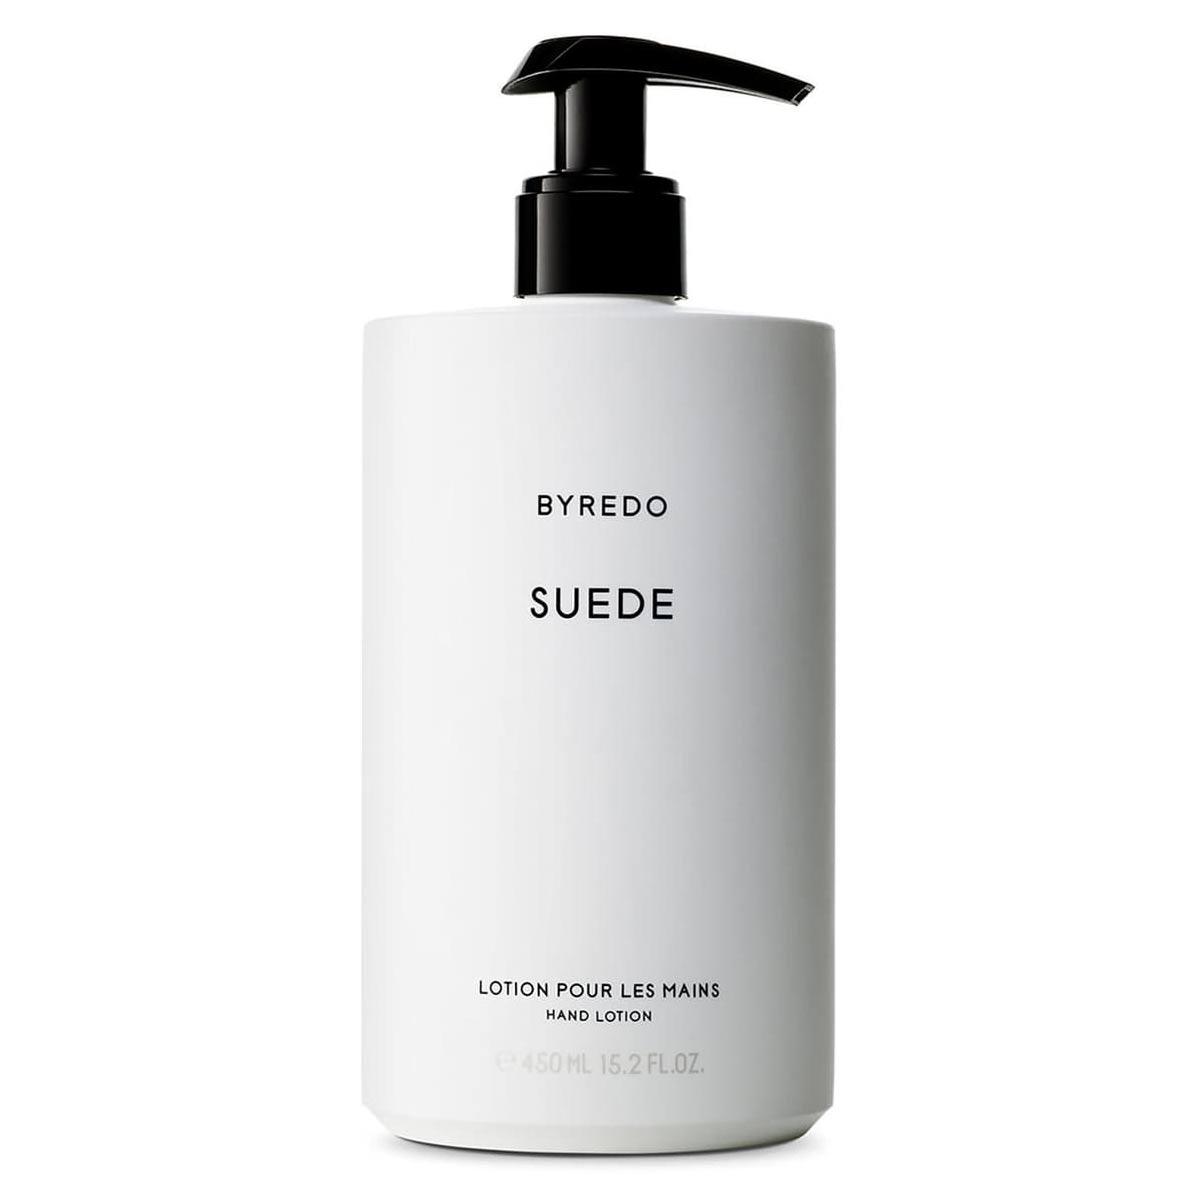 Primary image of Suede Hand Lotion